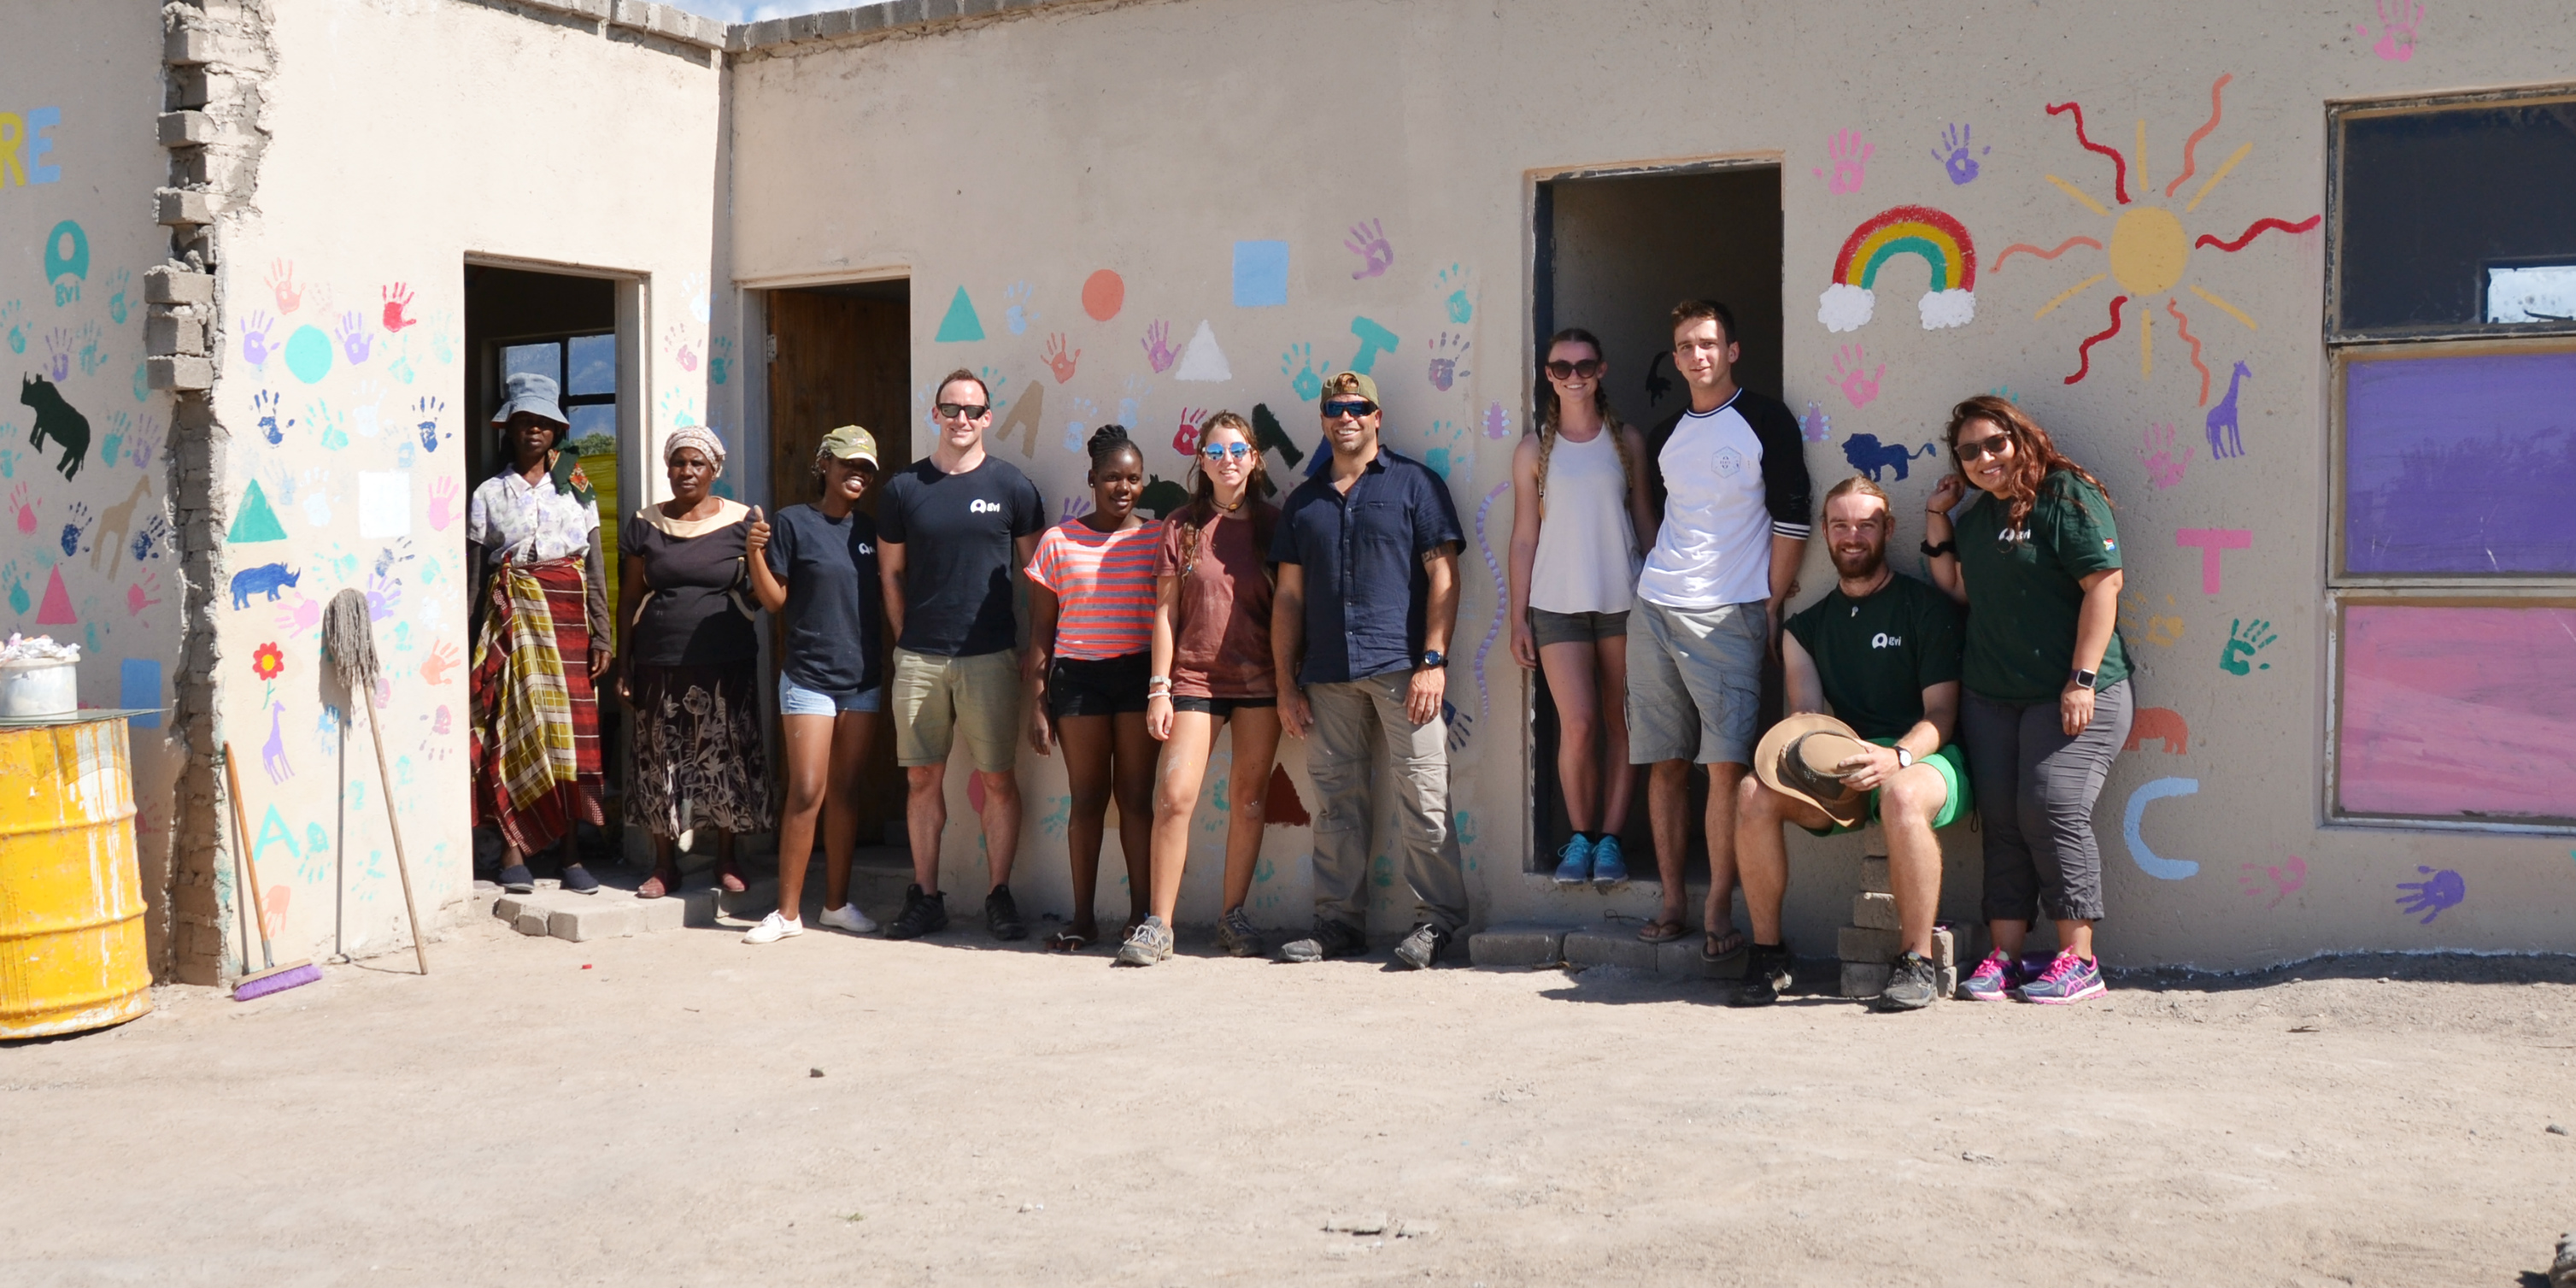 While volunteering in Africa with animals, GVI participants took time from their research to improve facilities at a local creche. Pictured: GVI participants and creche owners stand in front of the finished kitchen.